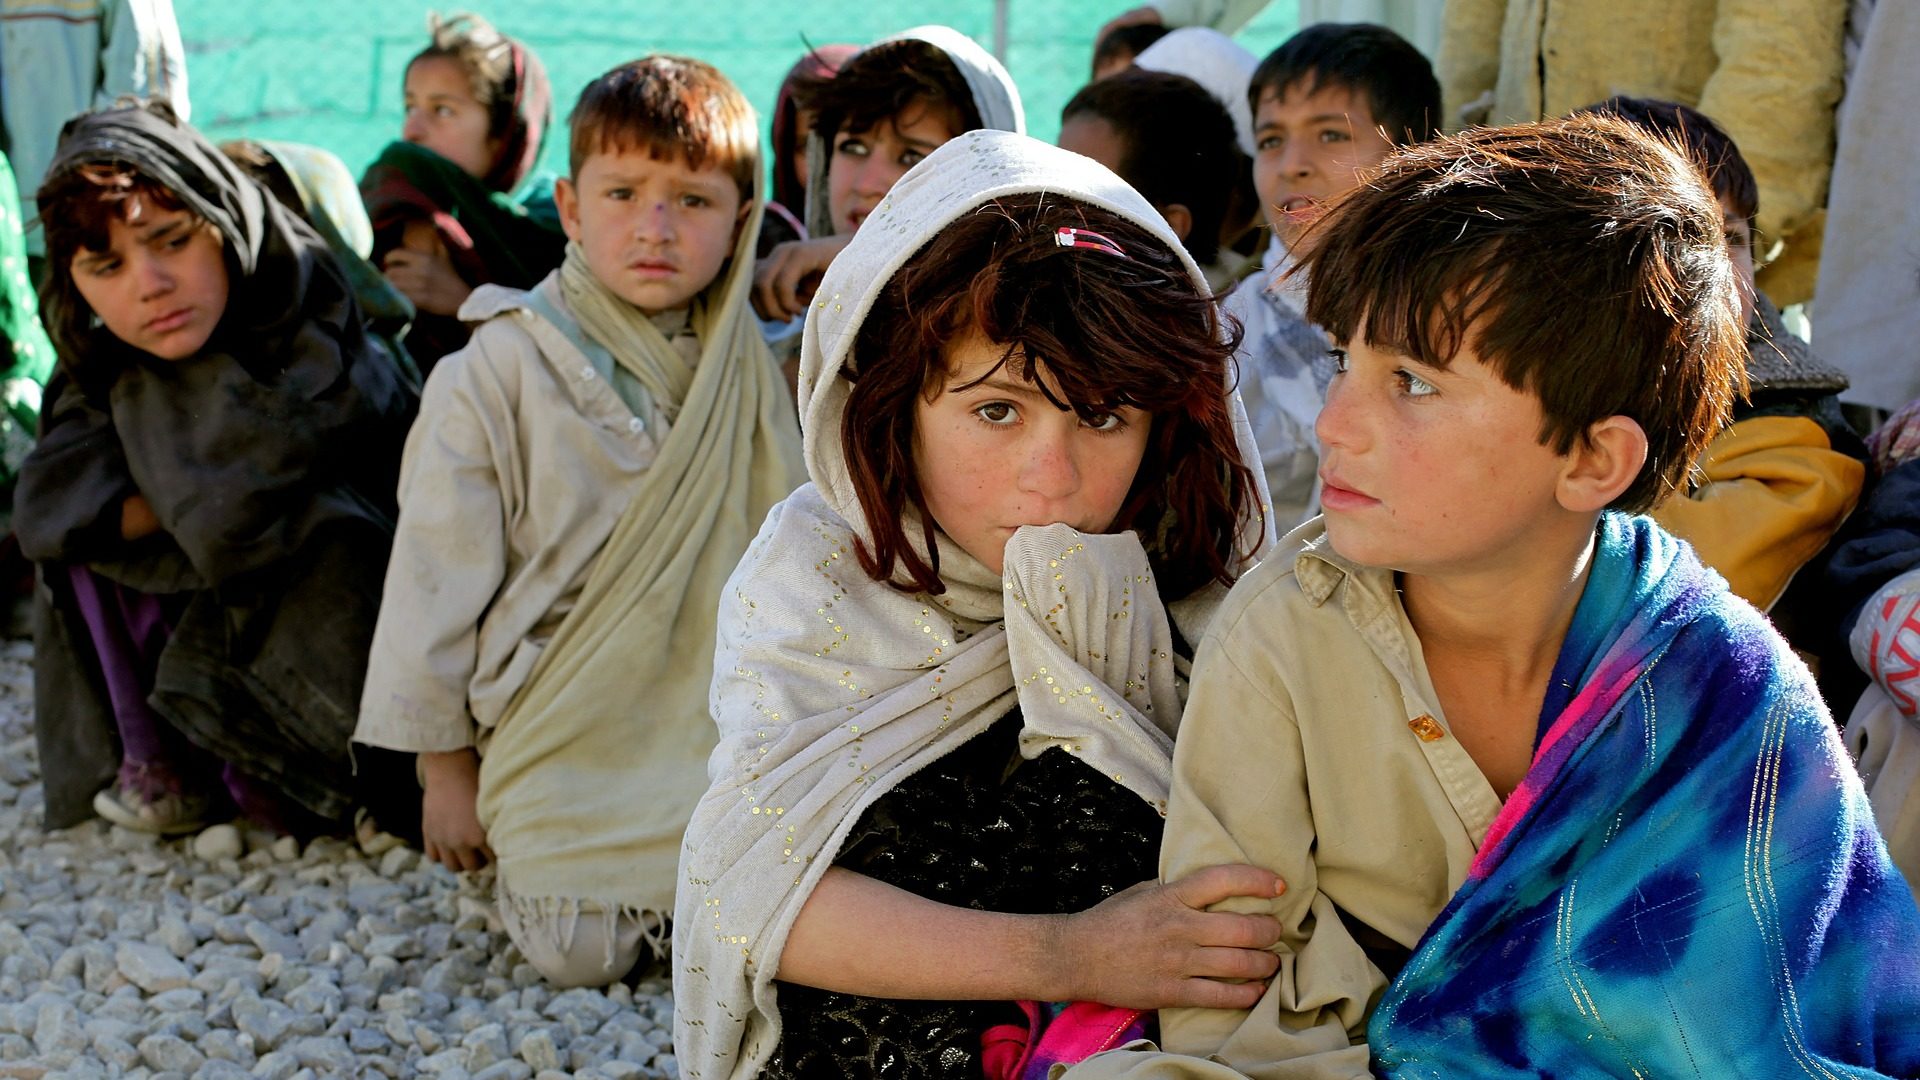 US Allows Transfer of Humanitarian Aid to Afghanistan Despite Sanctions